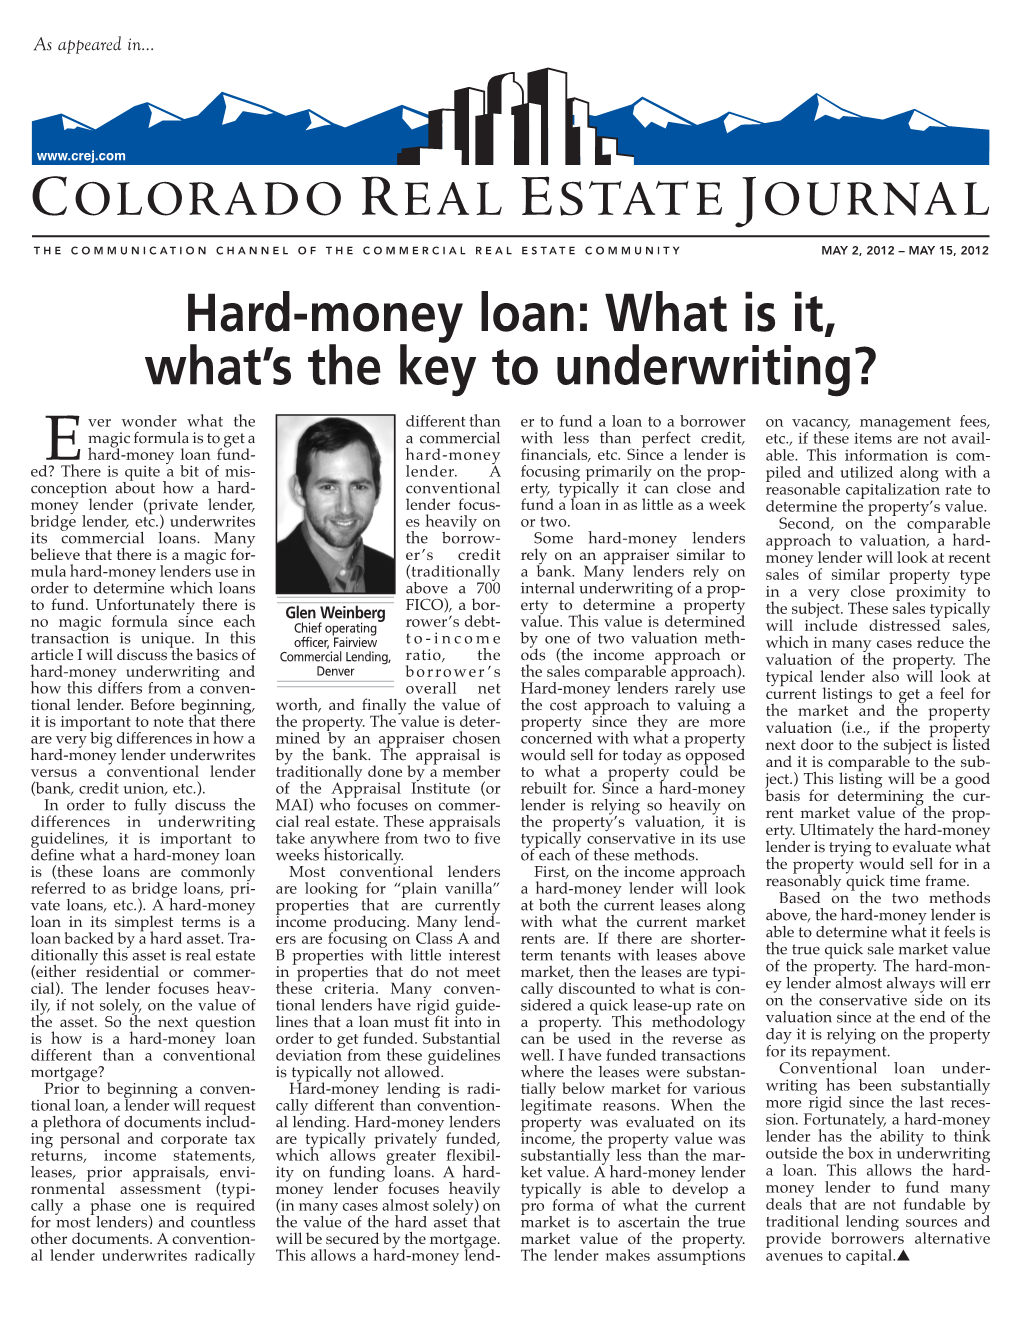 Hard-Money Loan: What Is It, What's the Key to Underwriting?